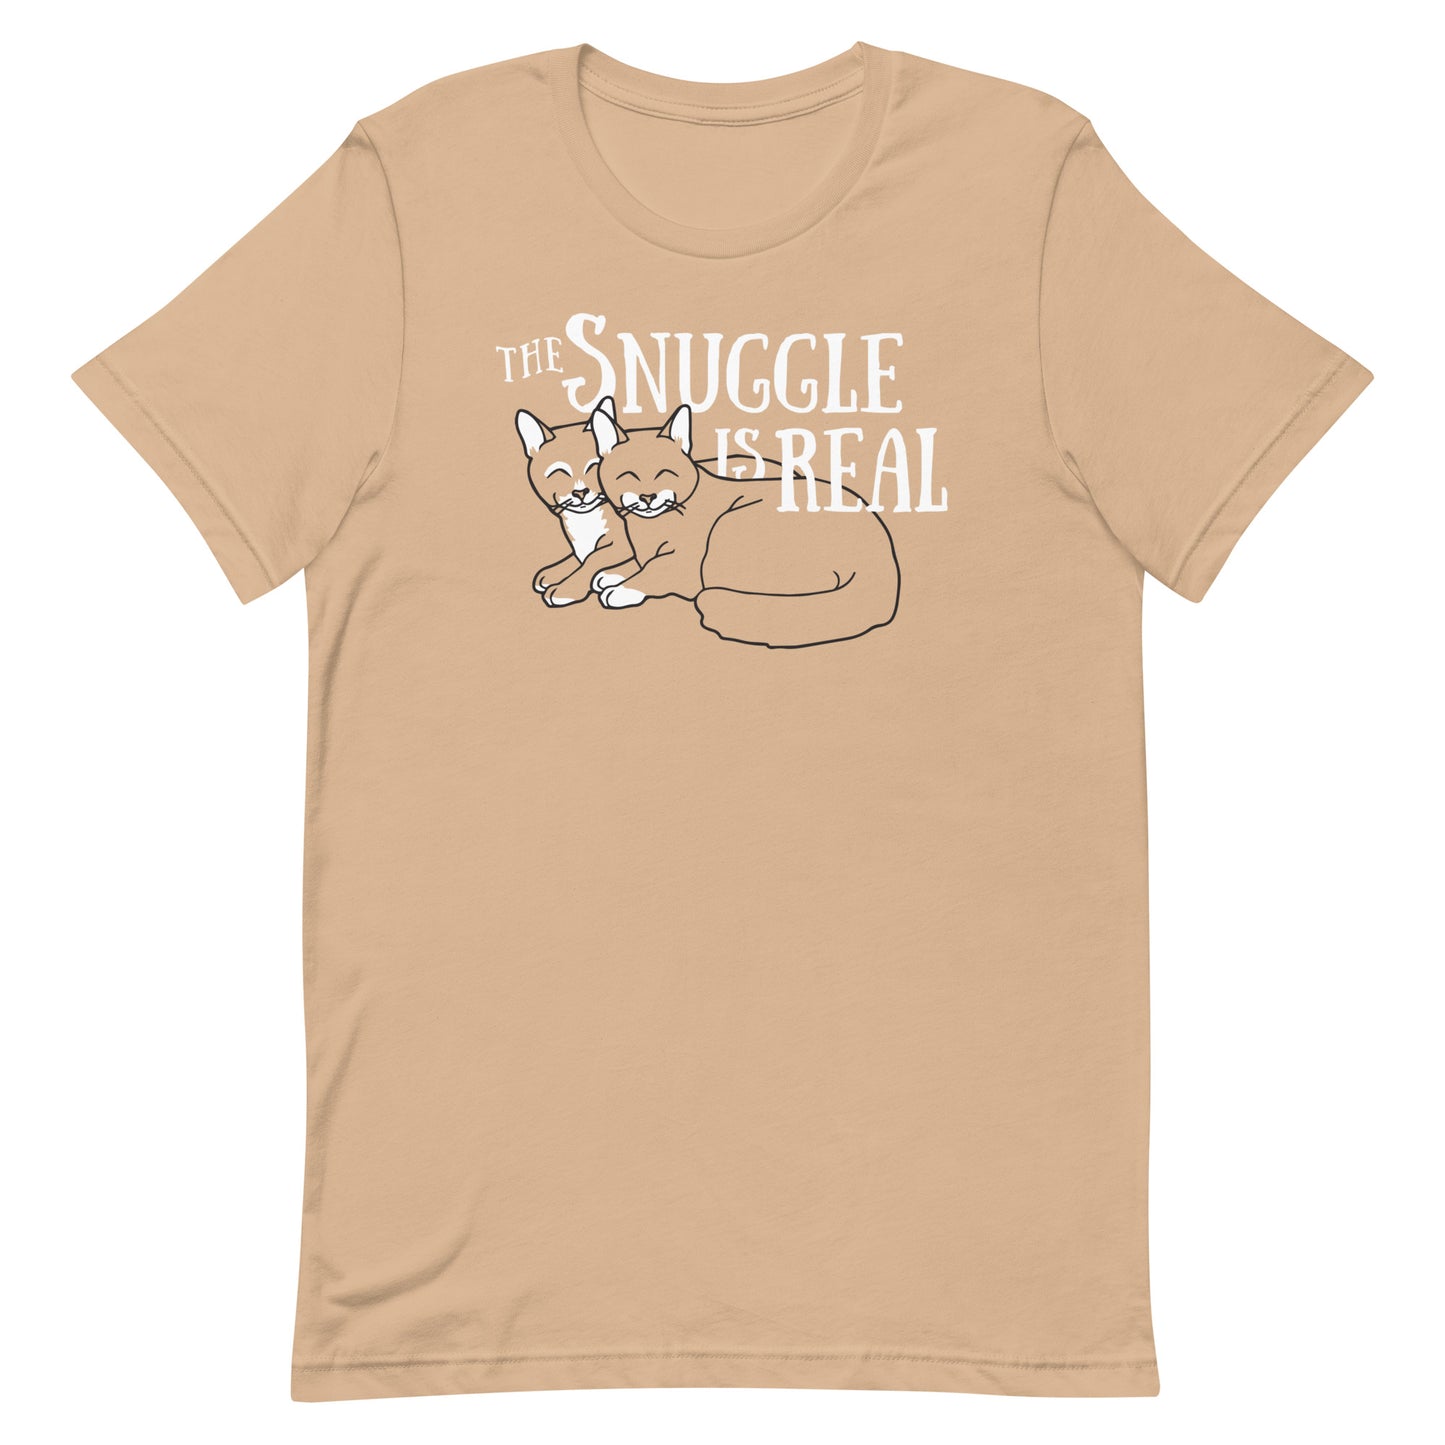 The Snuggle Is Real Men's Signature Tee